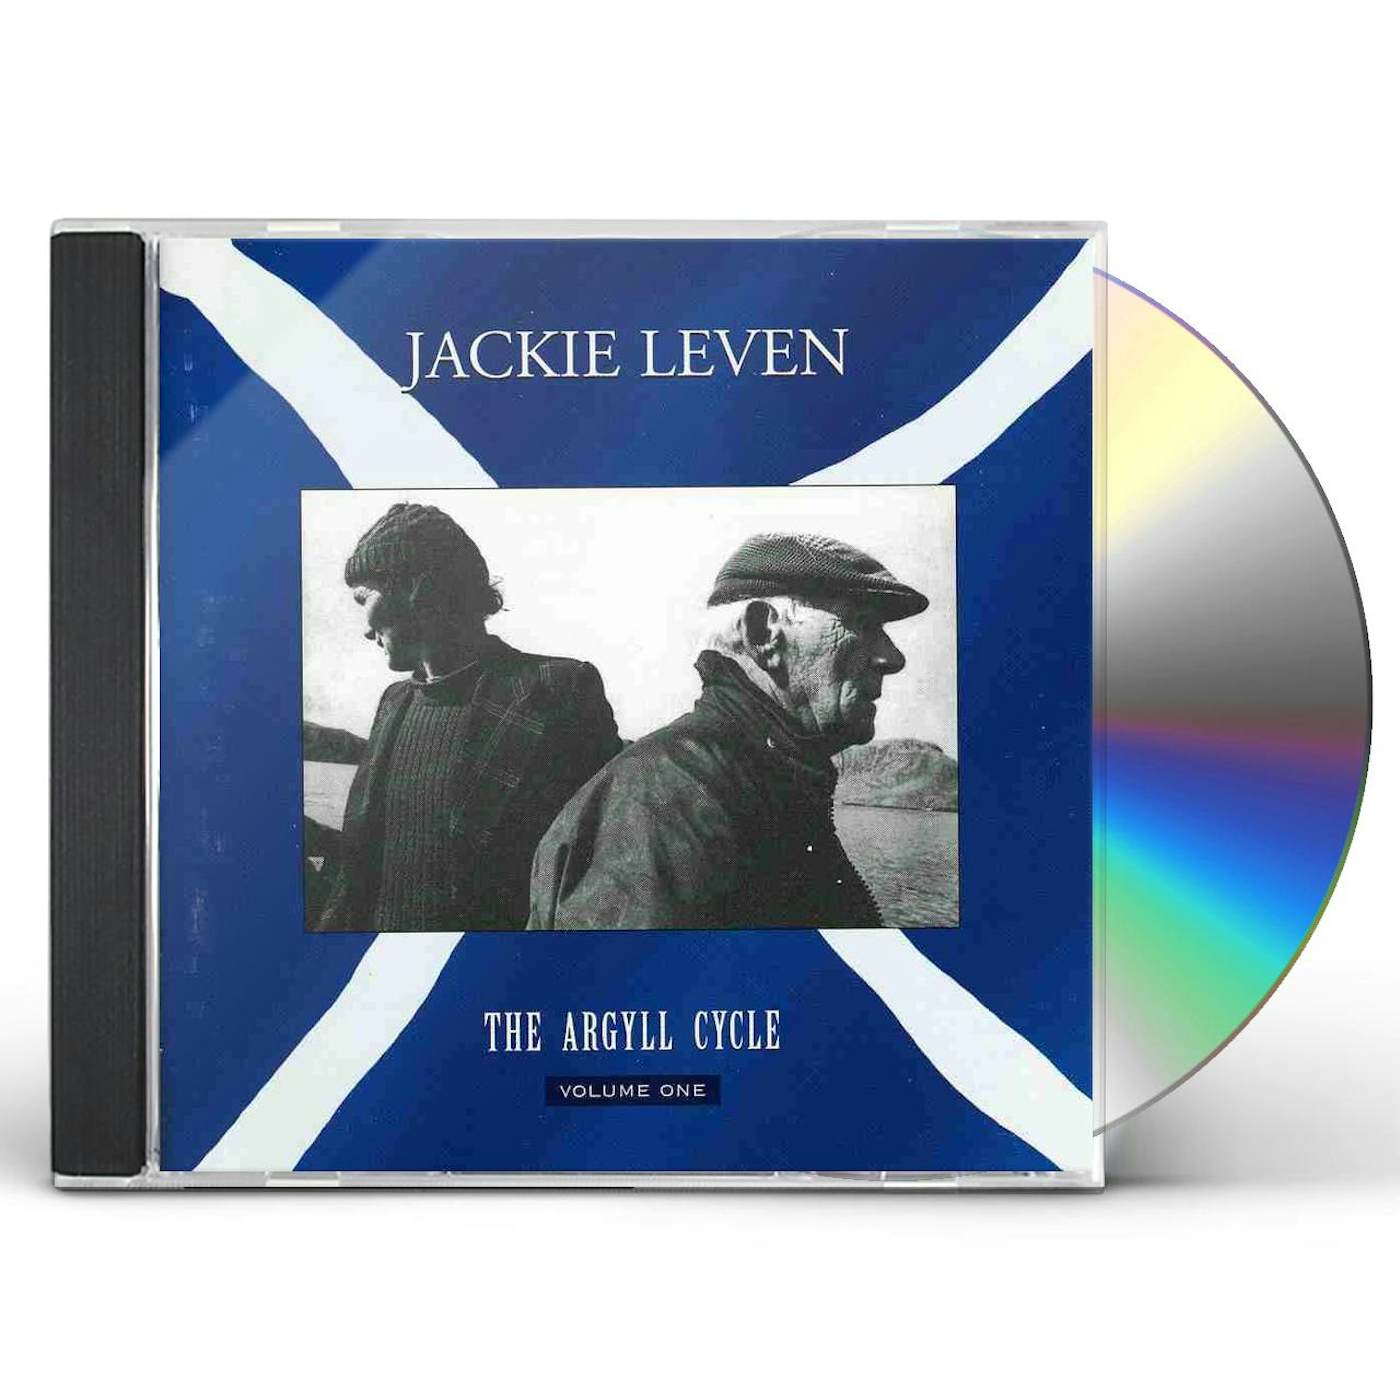 Jackie Leven VOL. 1-ARGYLL CYCLE CD